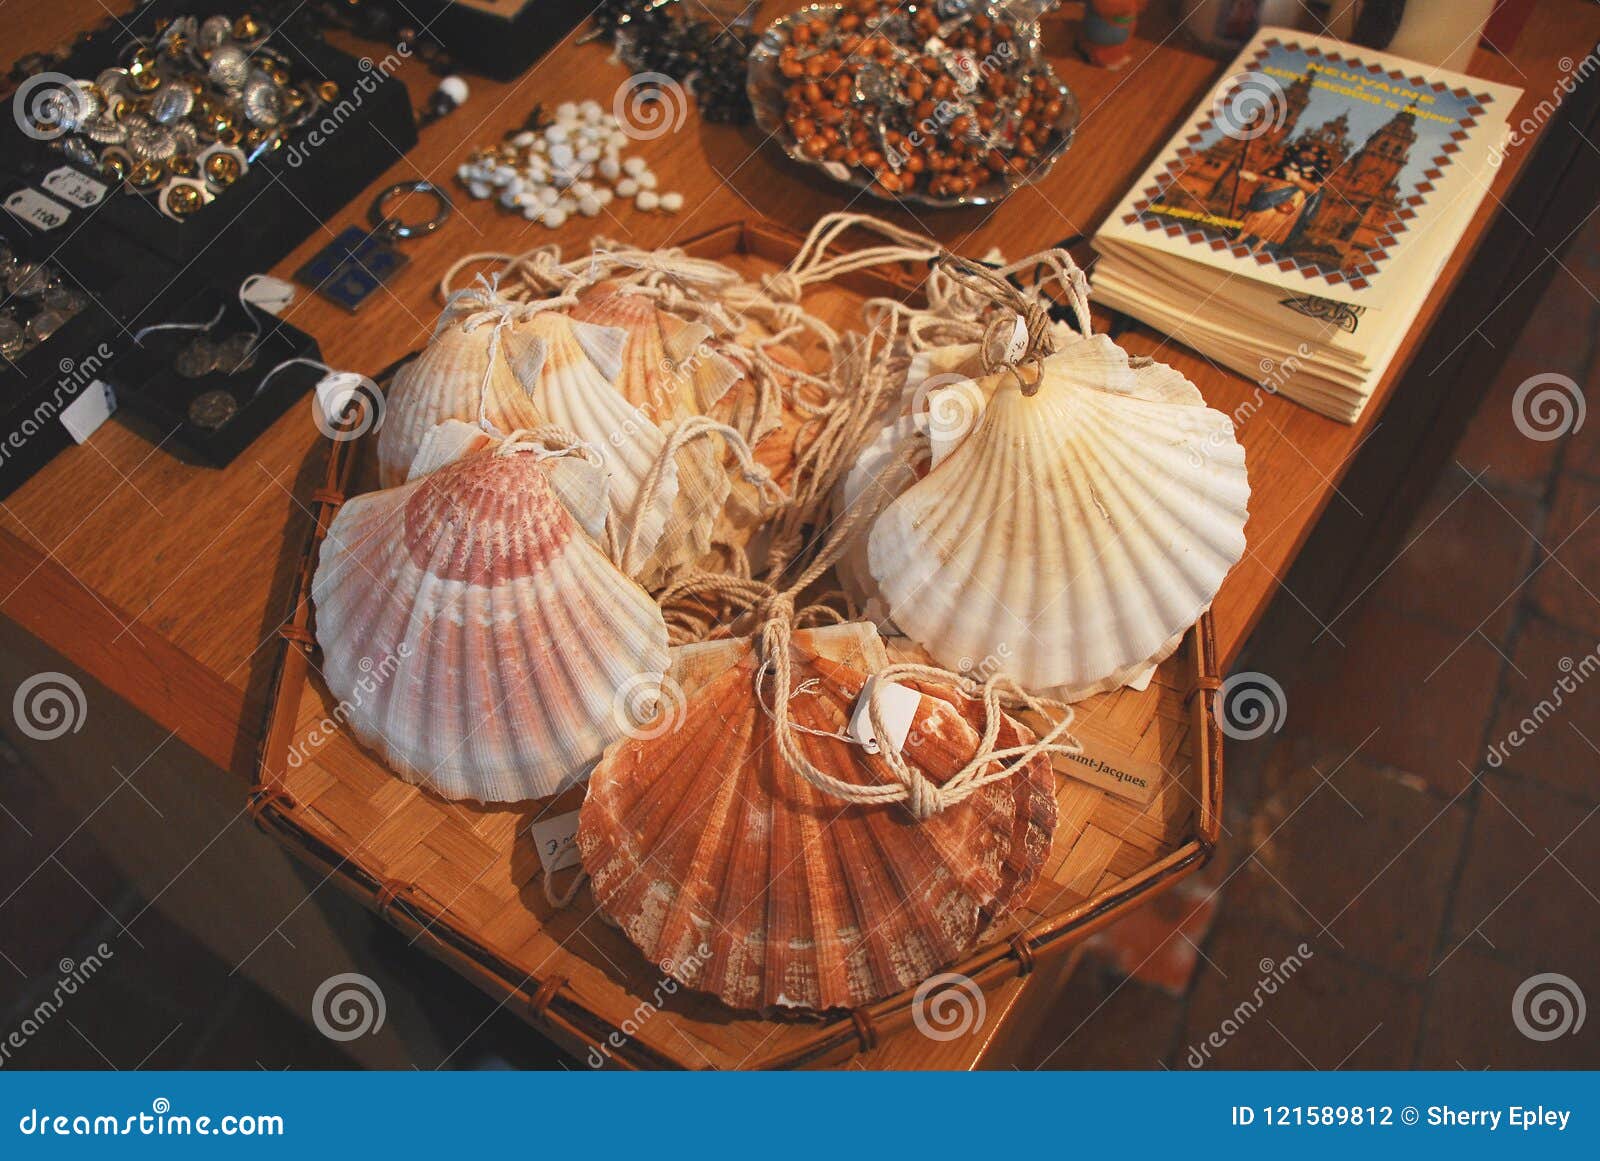 france-vezelay- scallop shells used as a  of pilgrimage